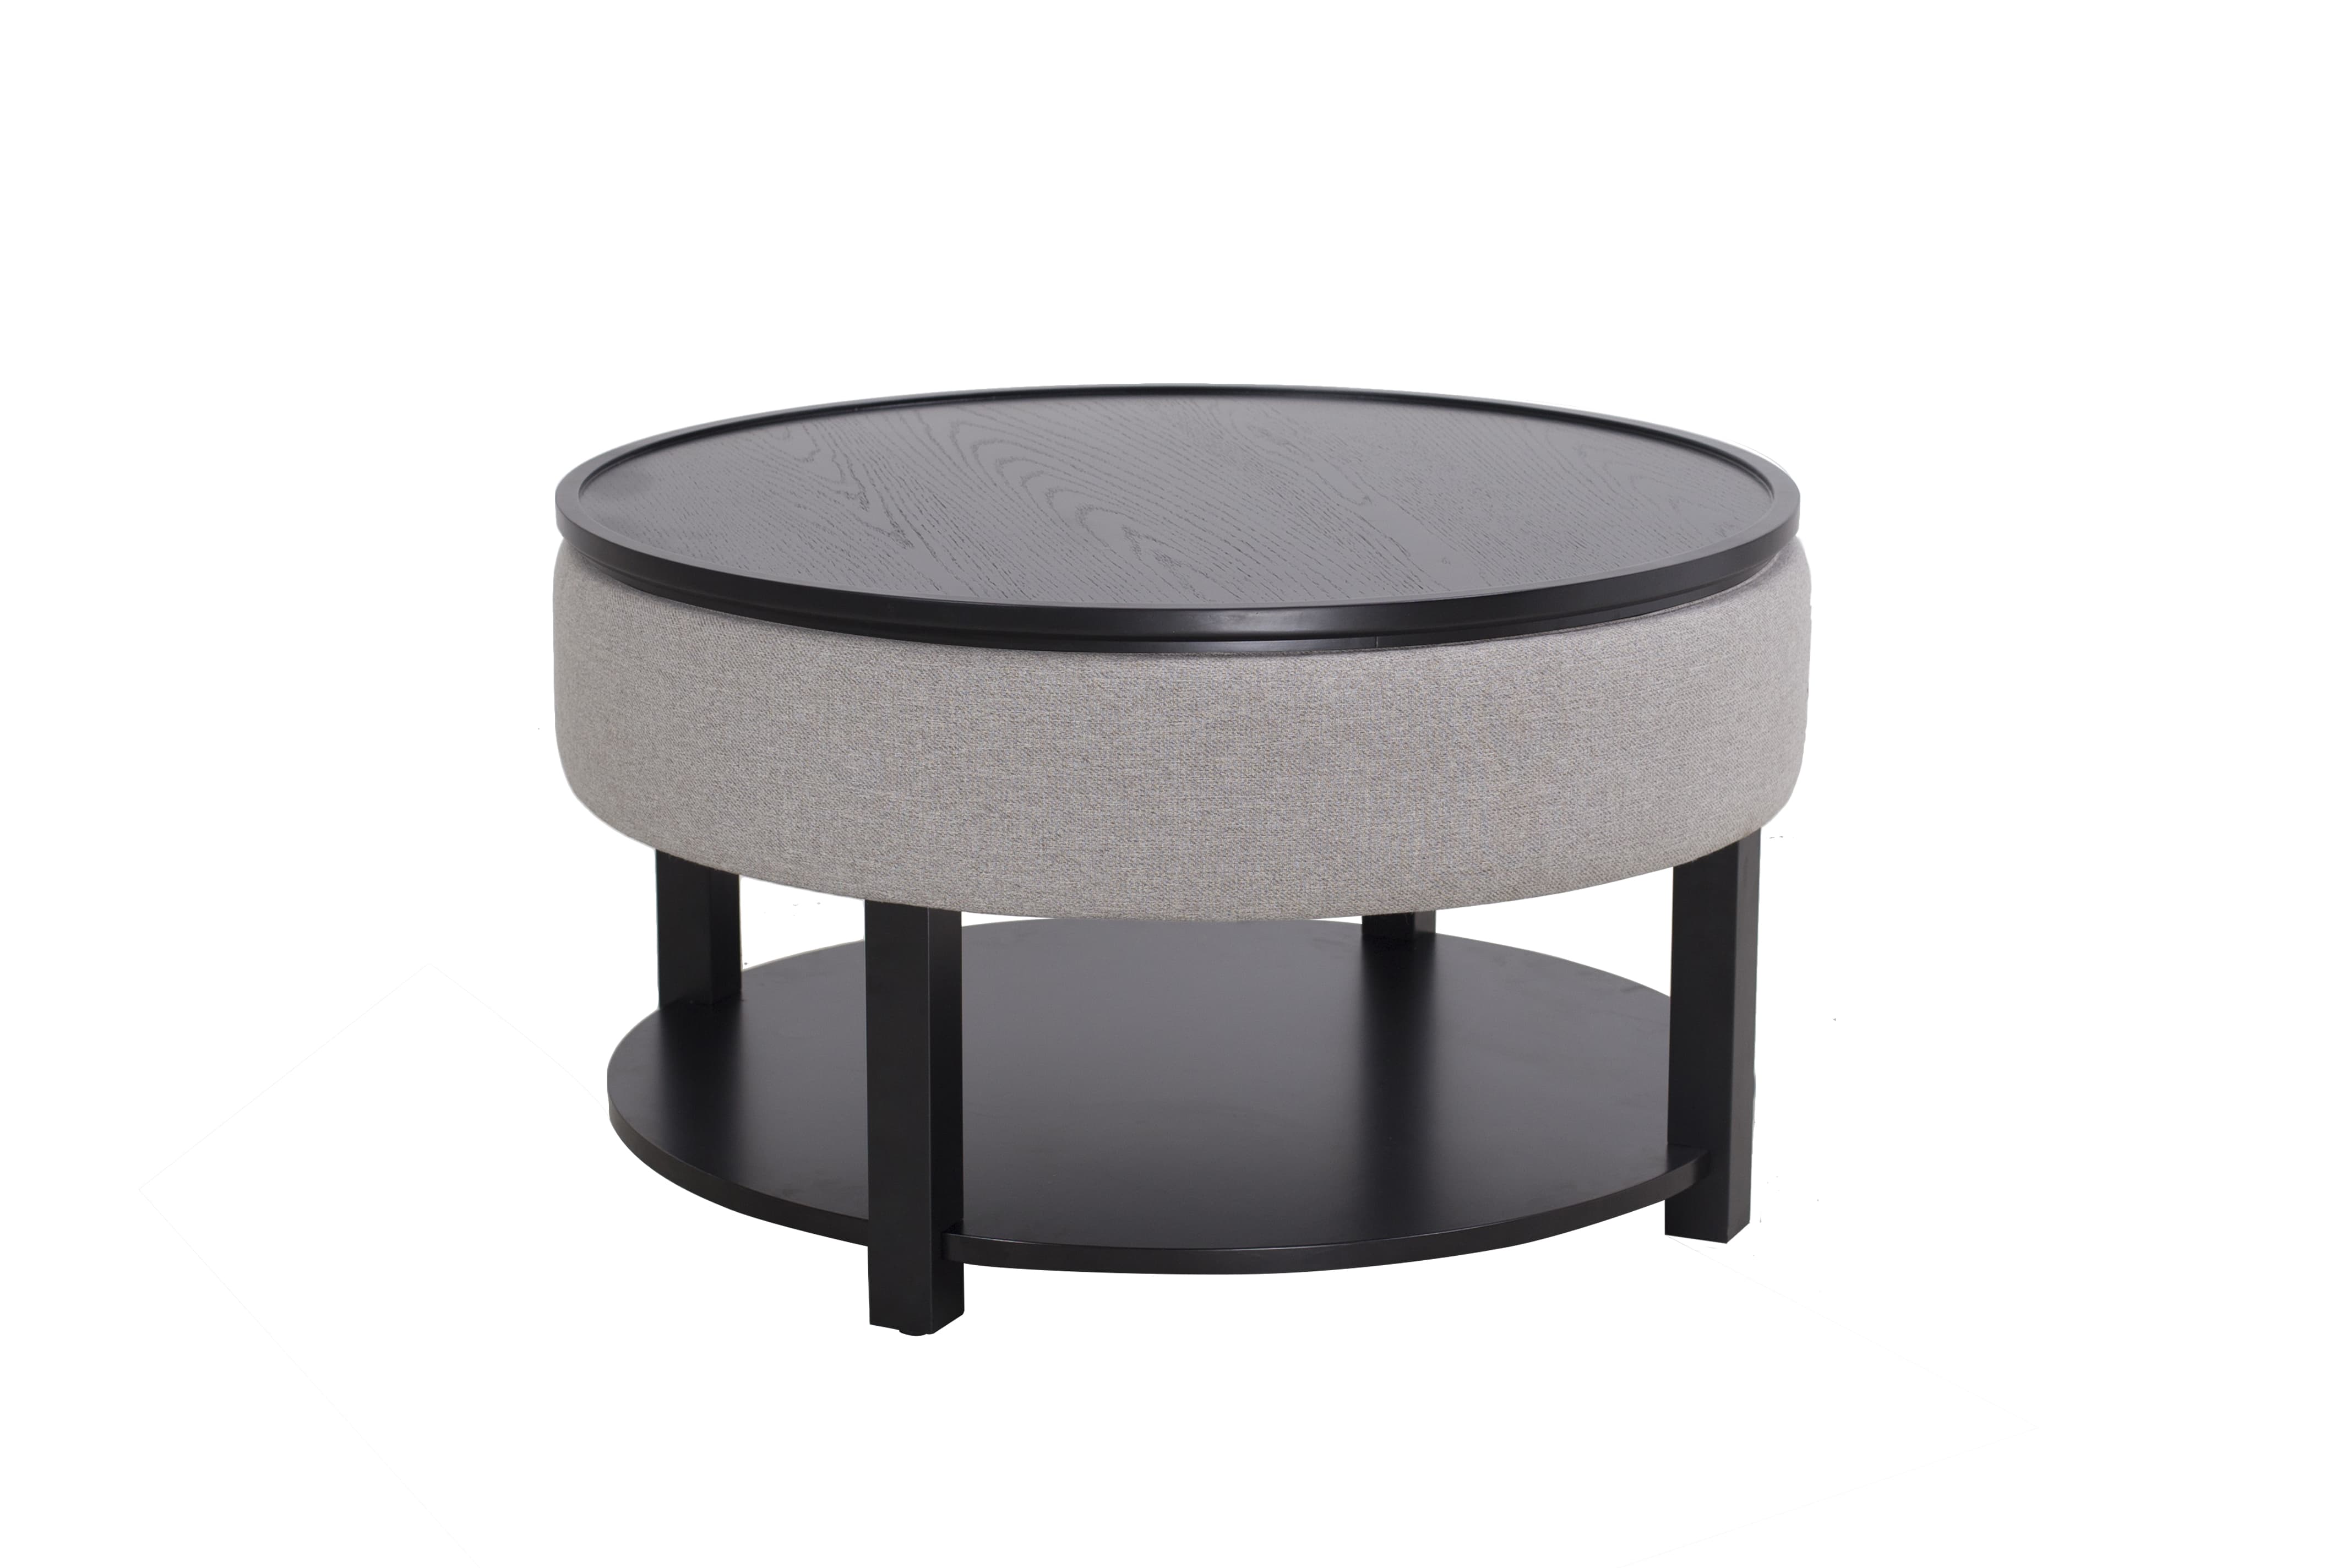 Christopher Knight Home Braeburn Modern Round Coffee Table The Best Home Products On Sale From July 26 August 1 2020 Popsugar Home Australia Photo 26